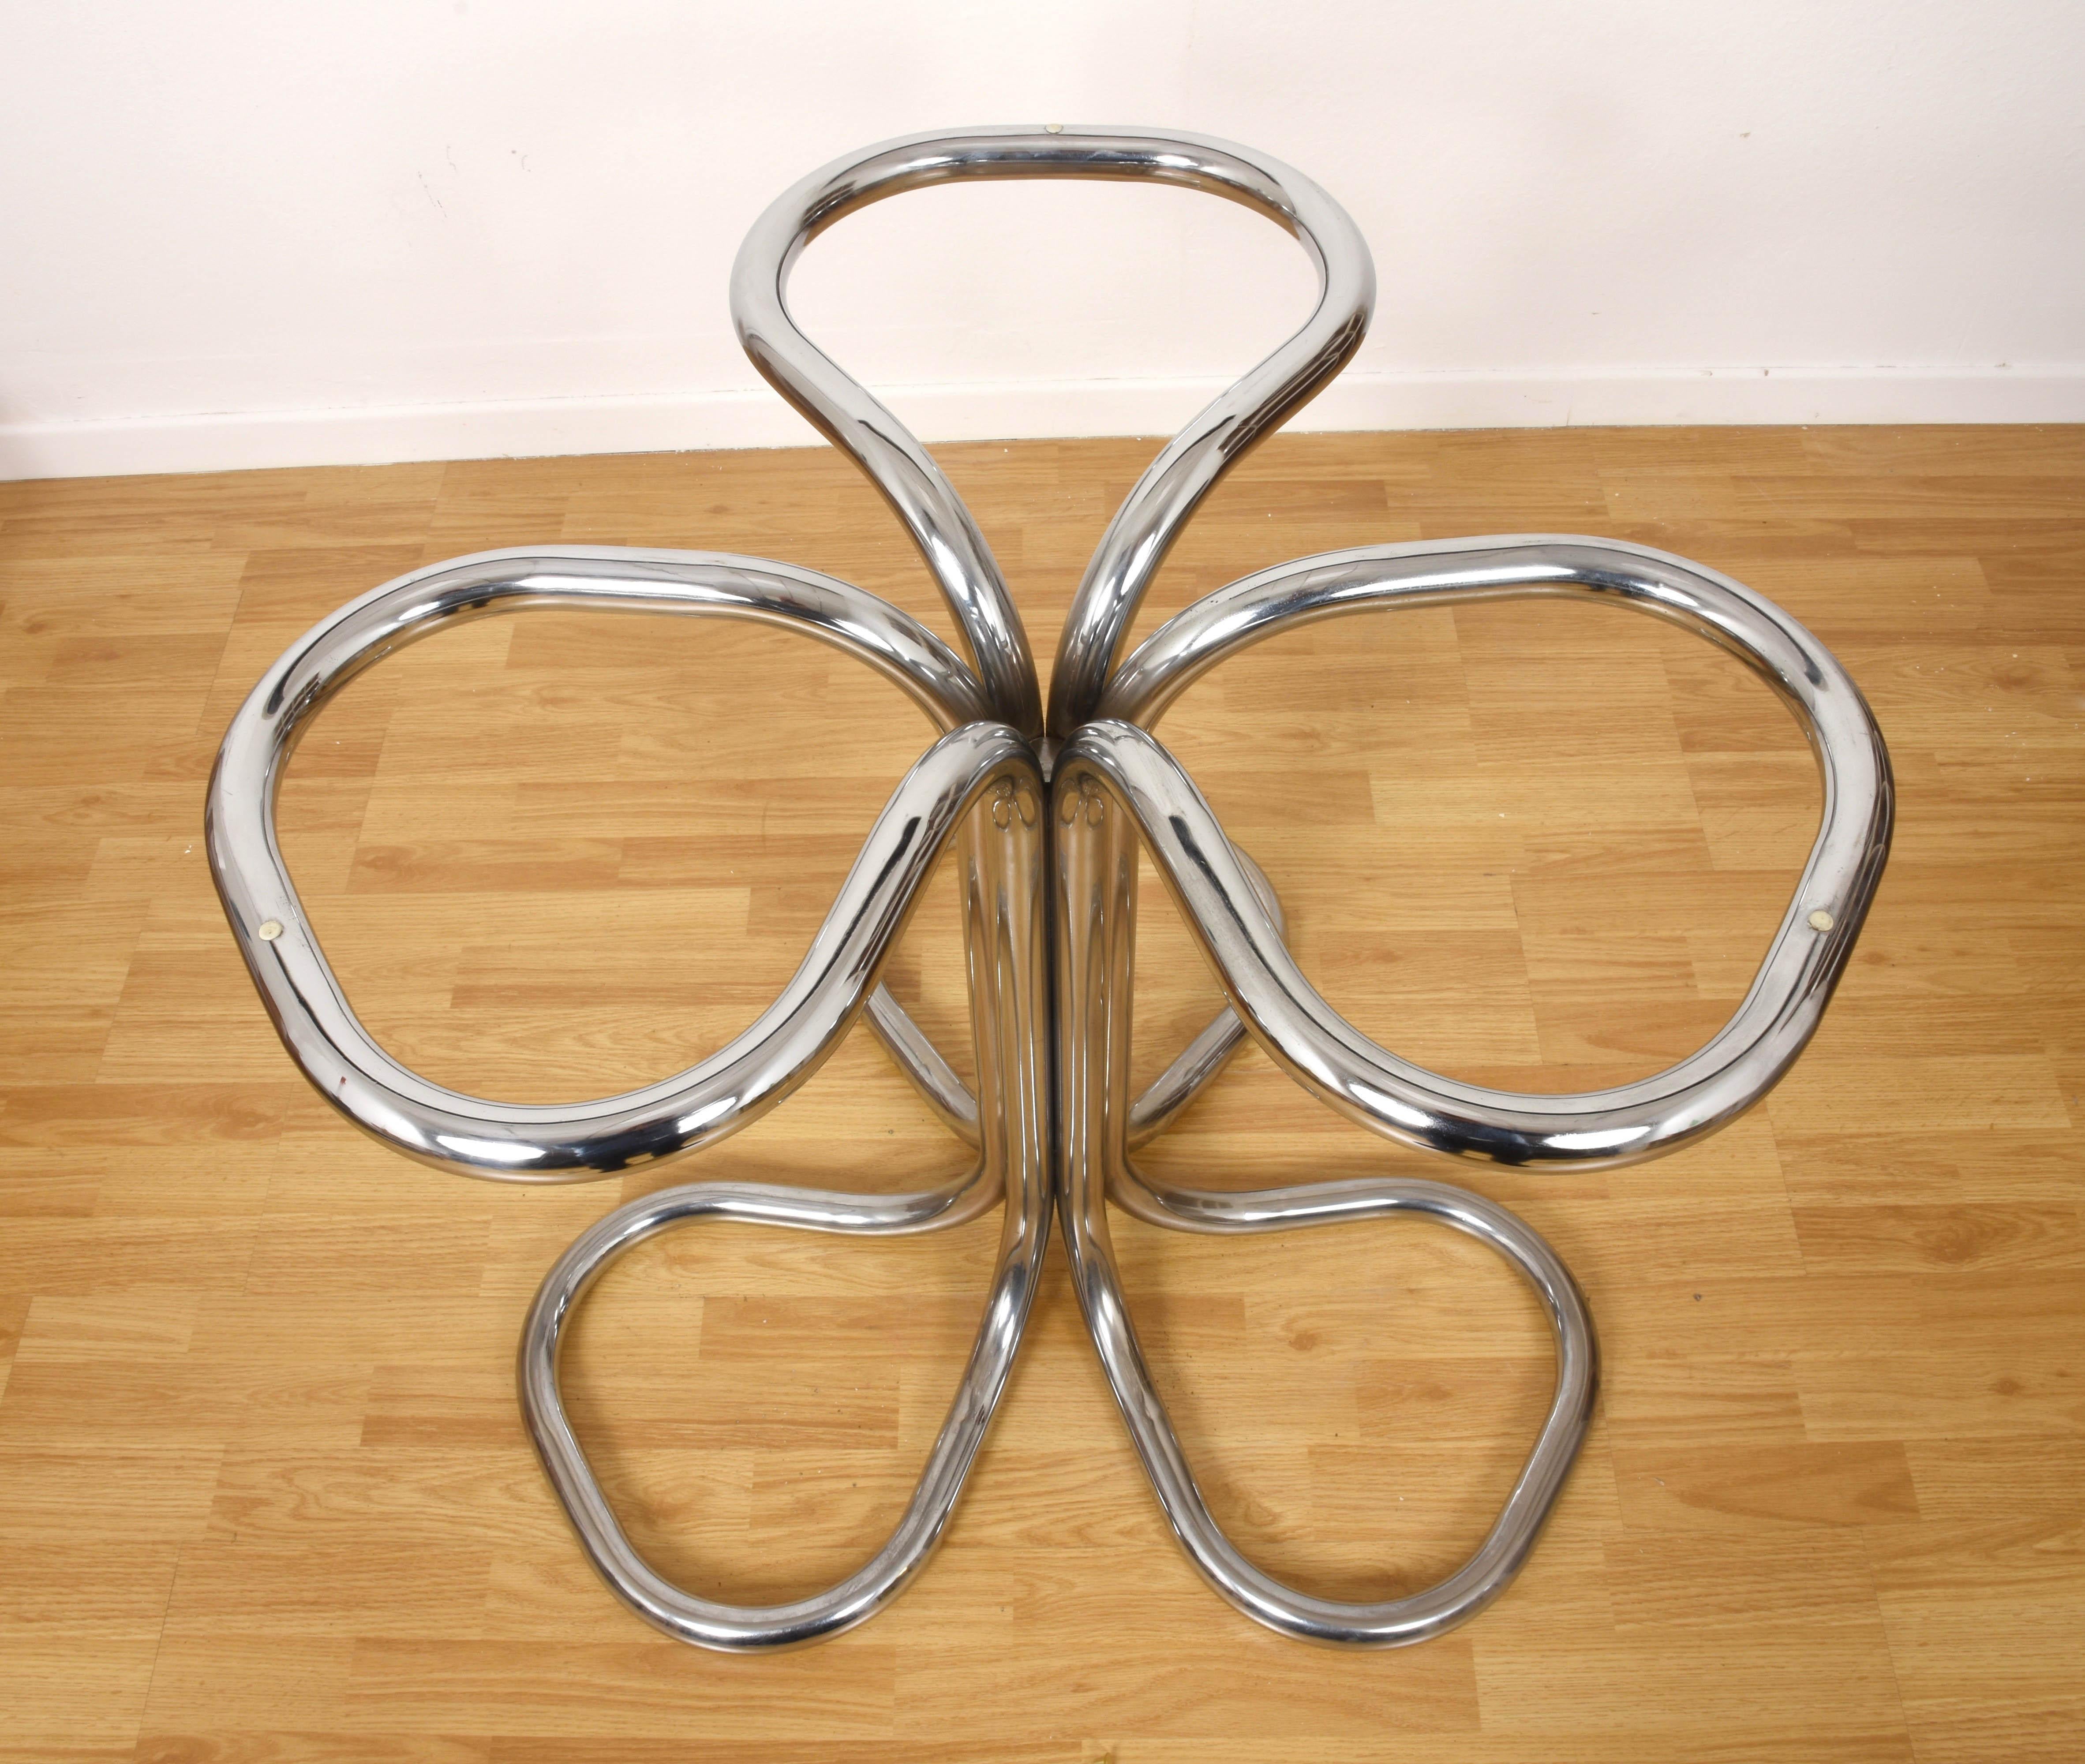 Italian Chrome Base Smoked Glass Top Dining Table, Giotto Stoppino, Italy, 1970s In Good Condition In Roma, IT